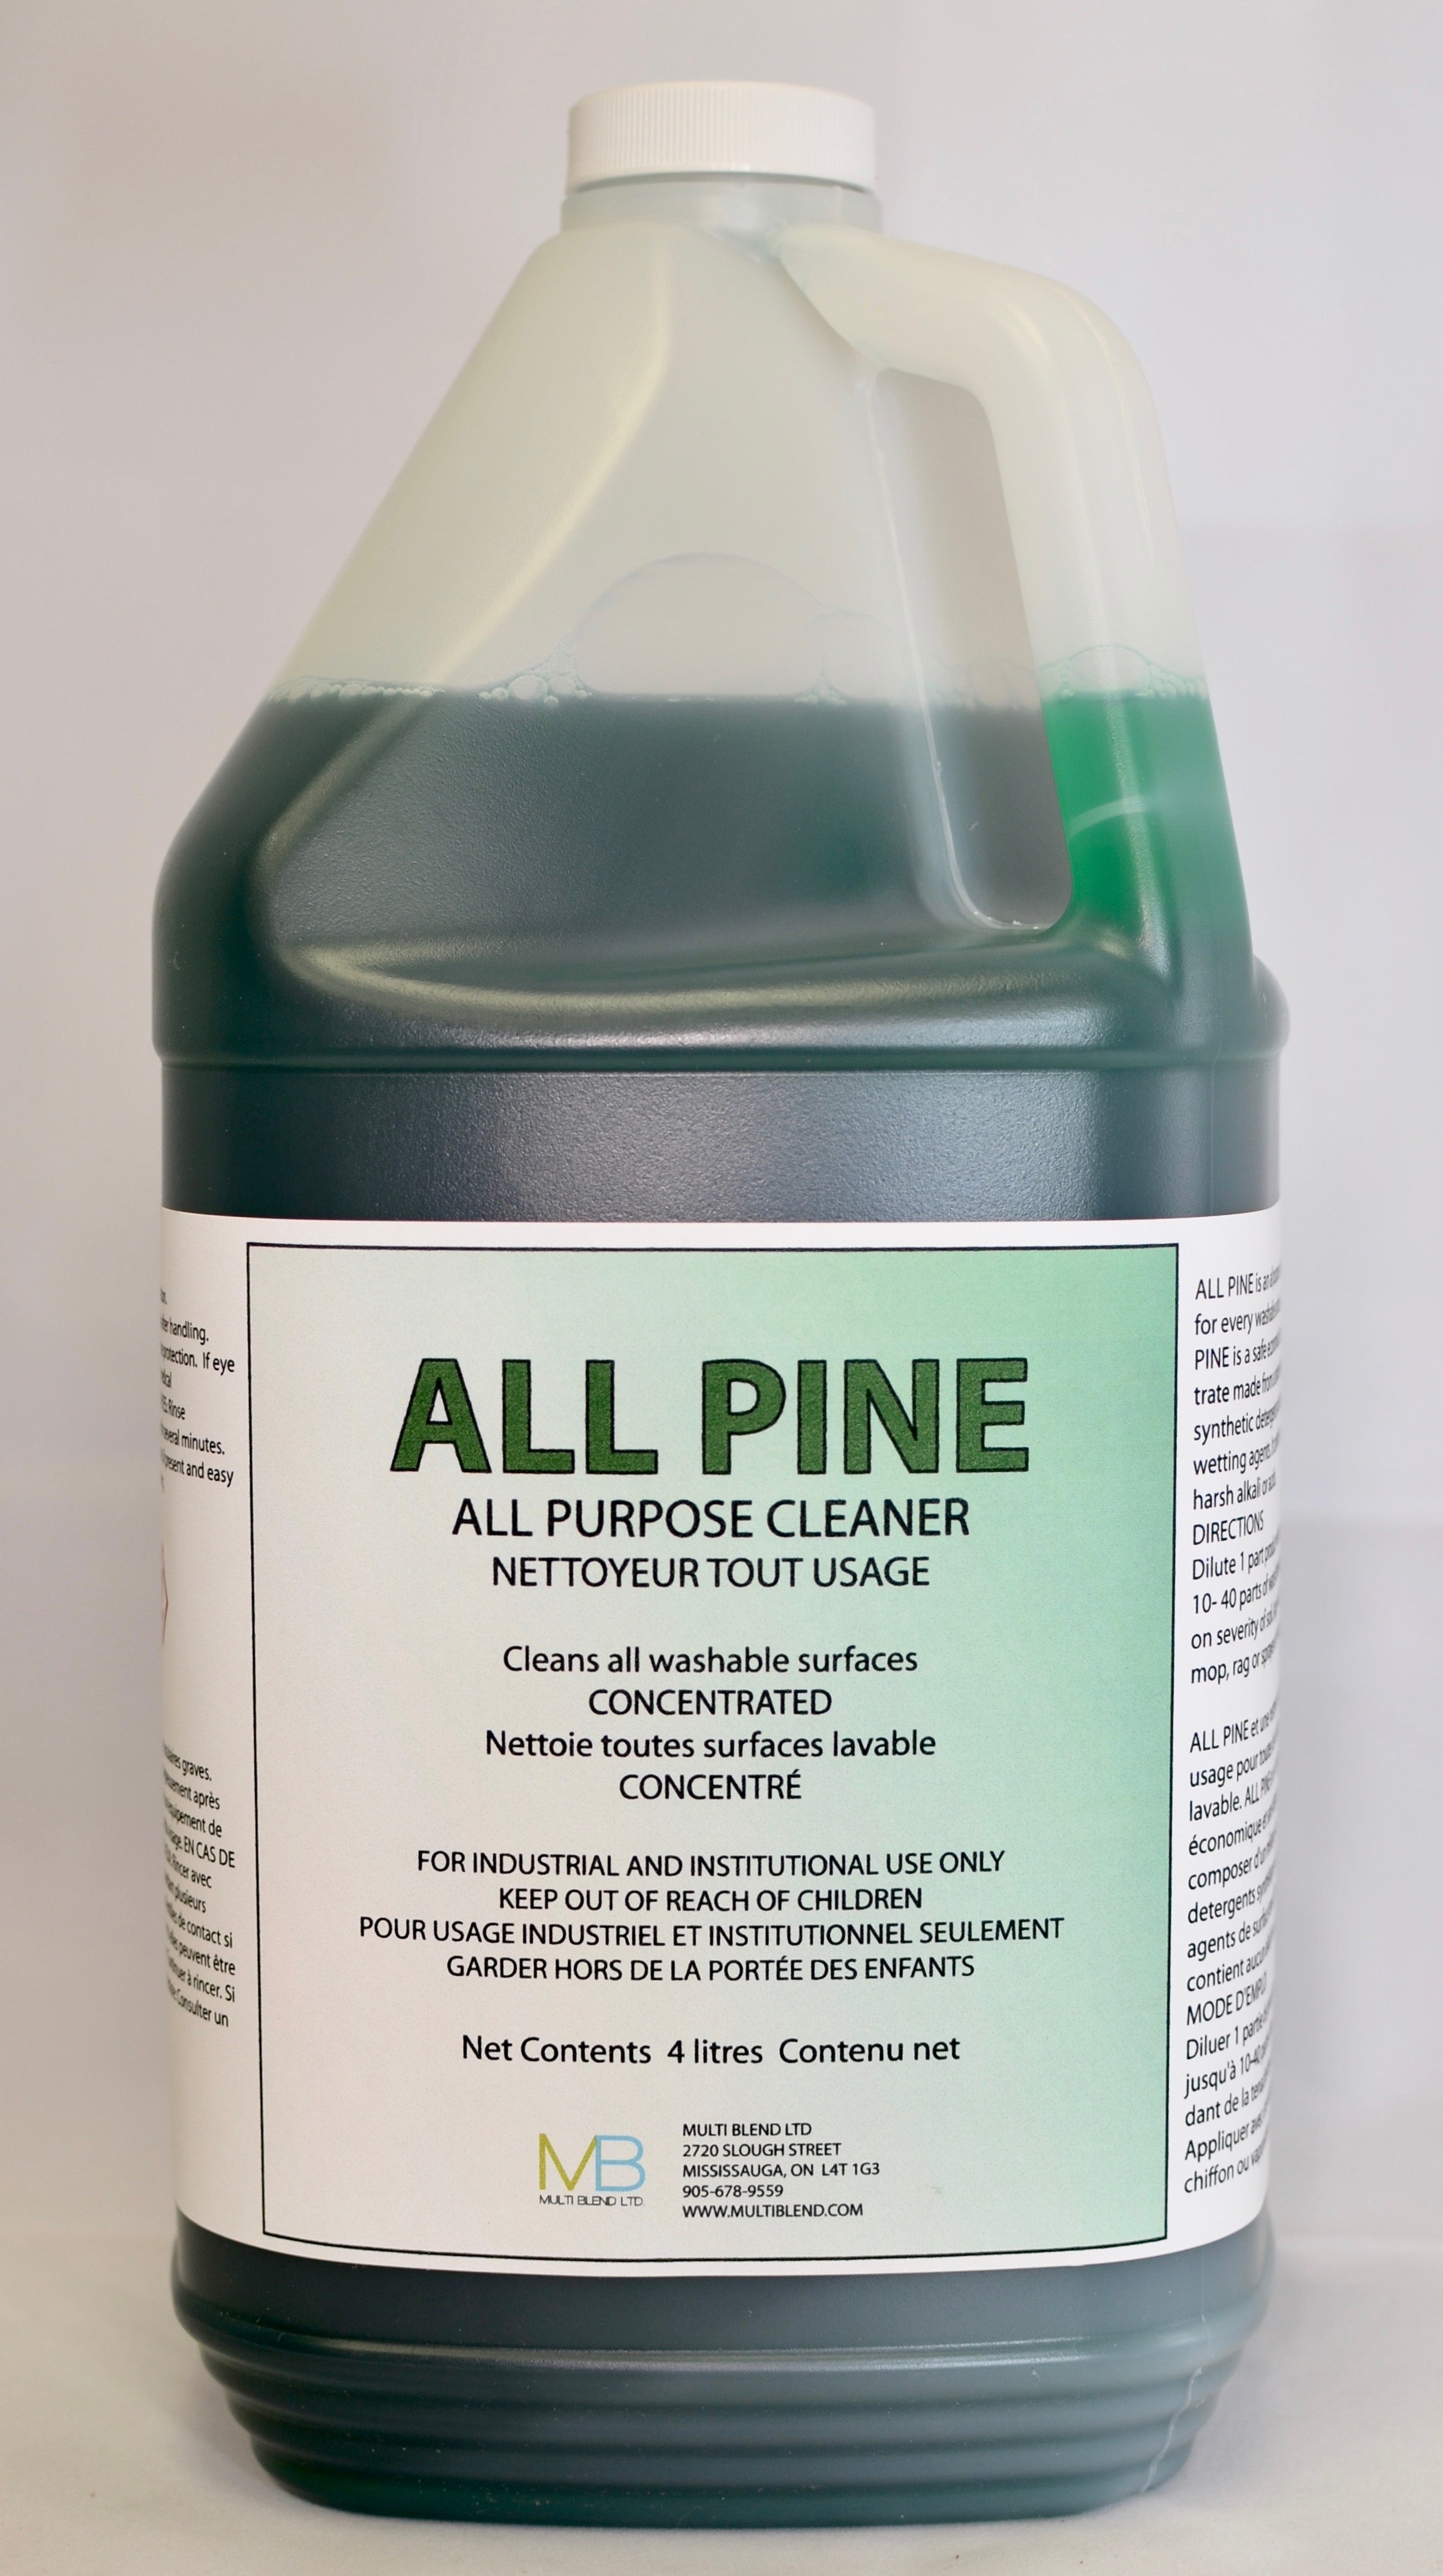 All Pine